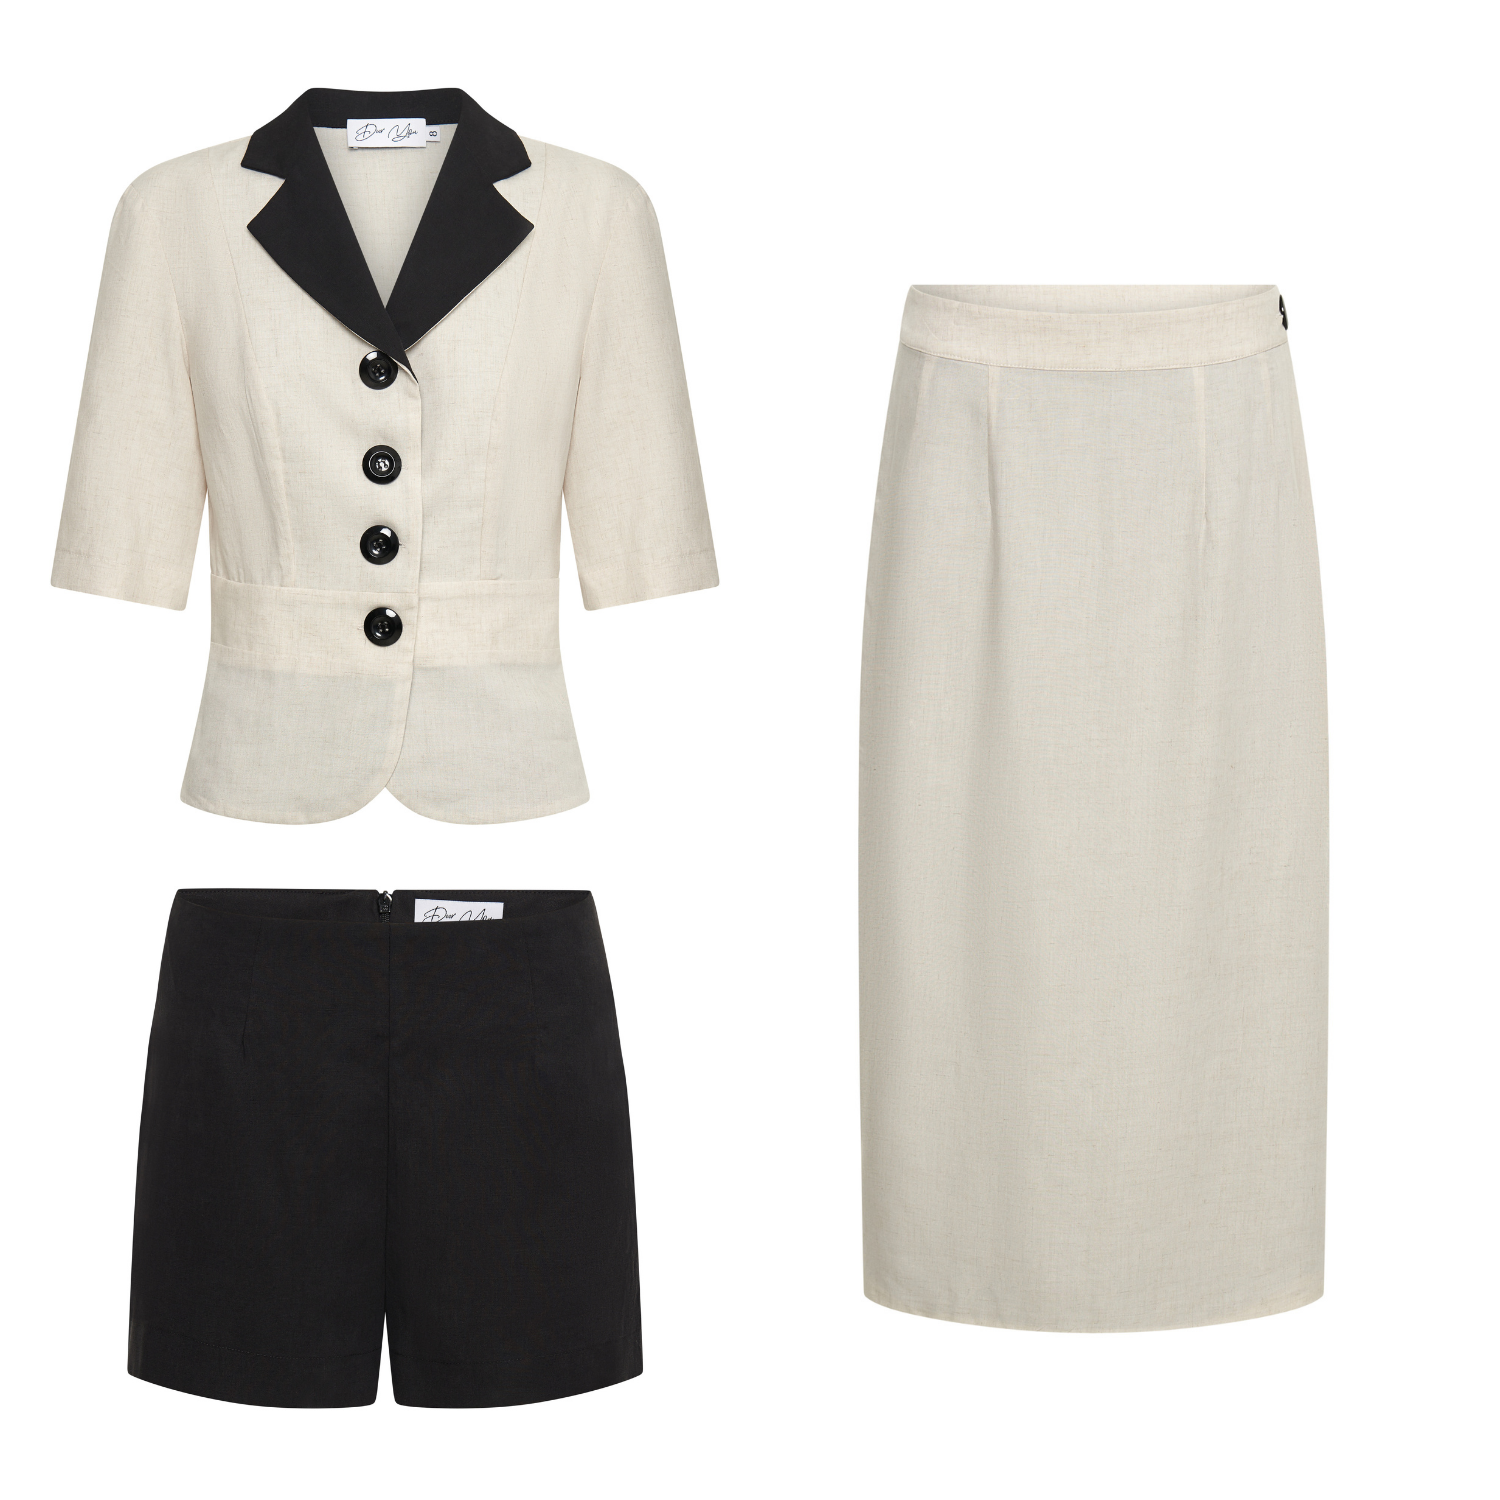 Iris Igniting 3 piece Set consisting of Jacket, Shorts and Skirt in Natural